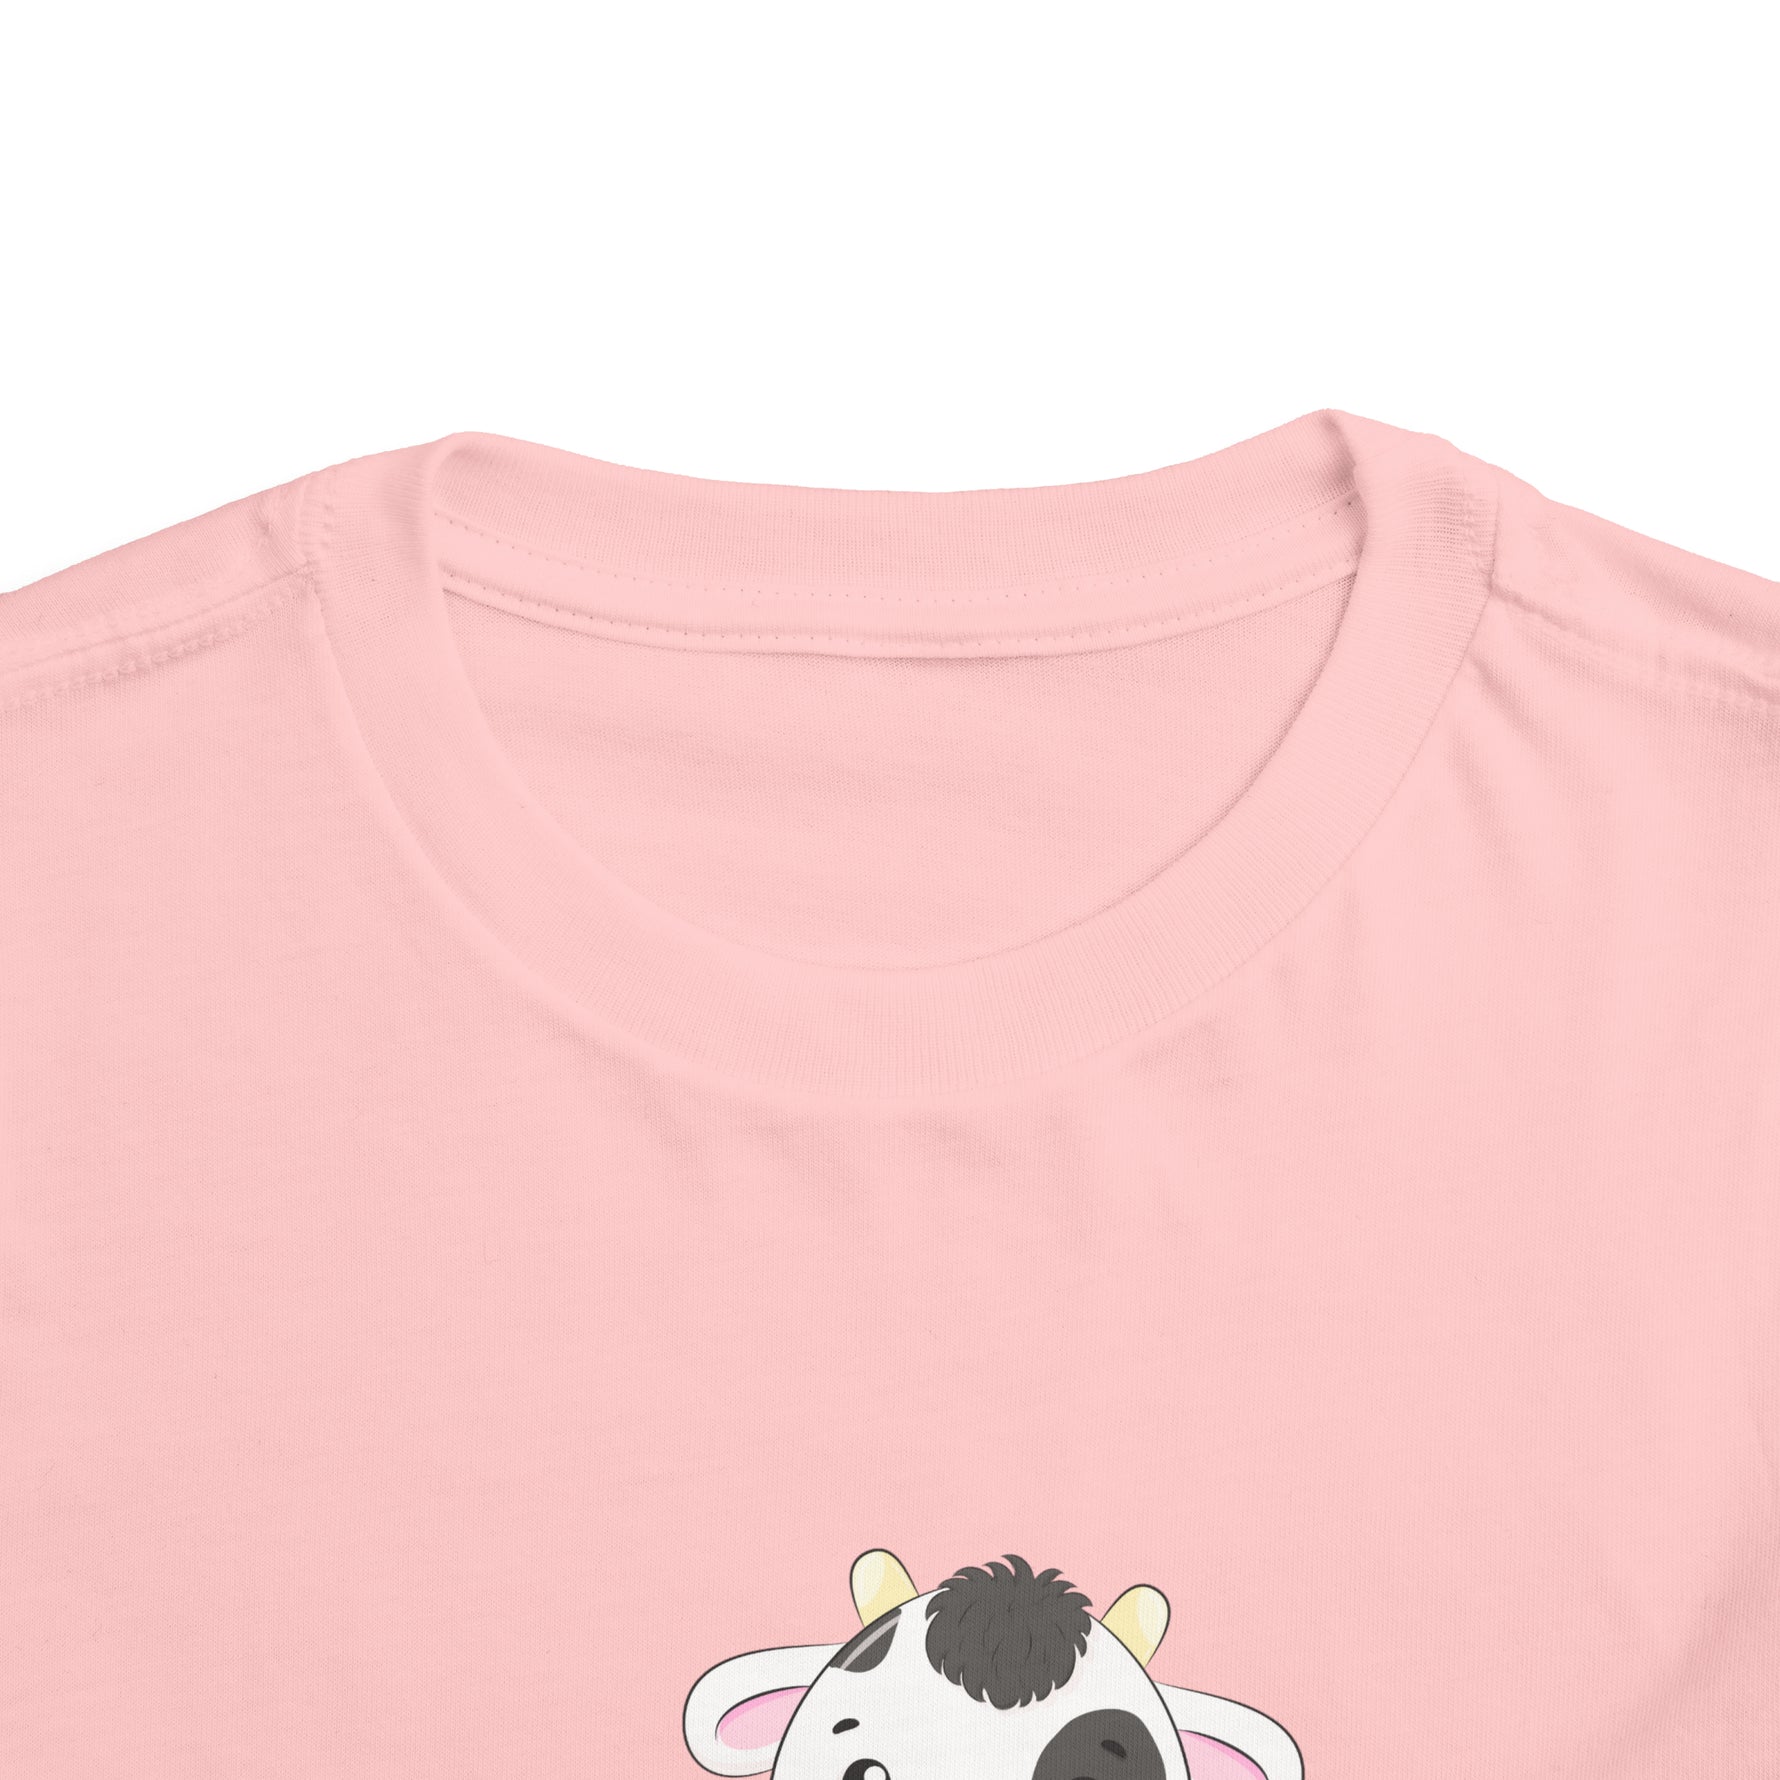 Holy Cow I'm Cute Toddler Tee-Ashley&#39;s Artistries